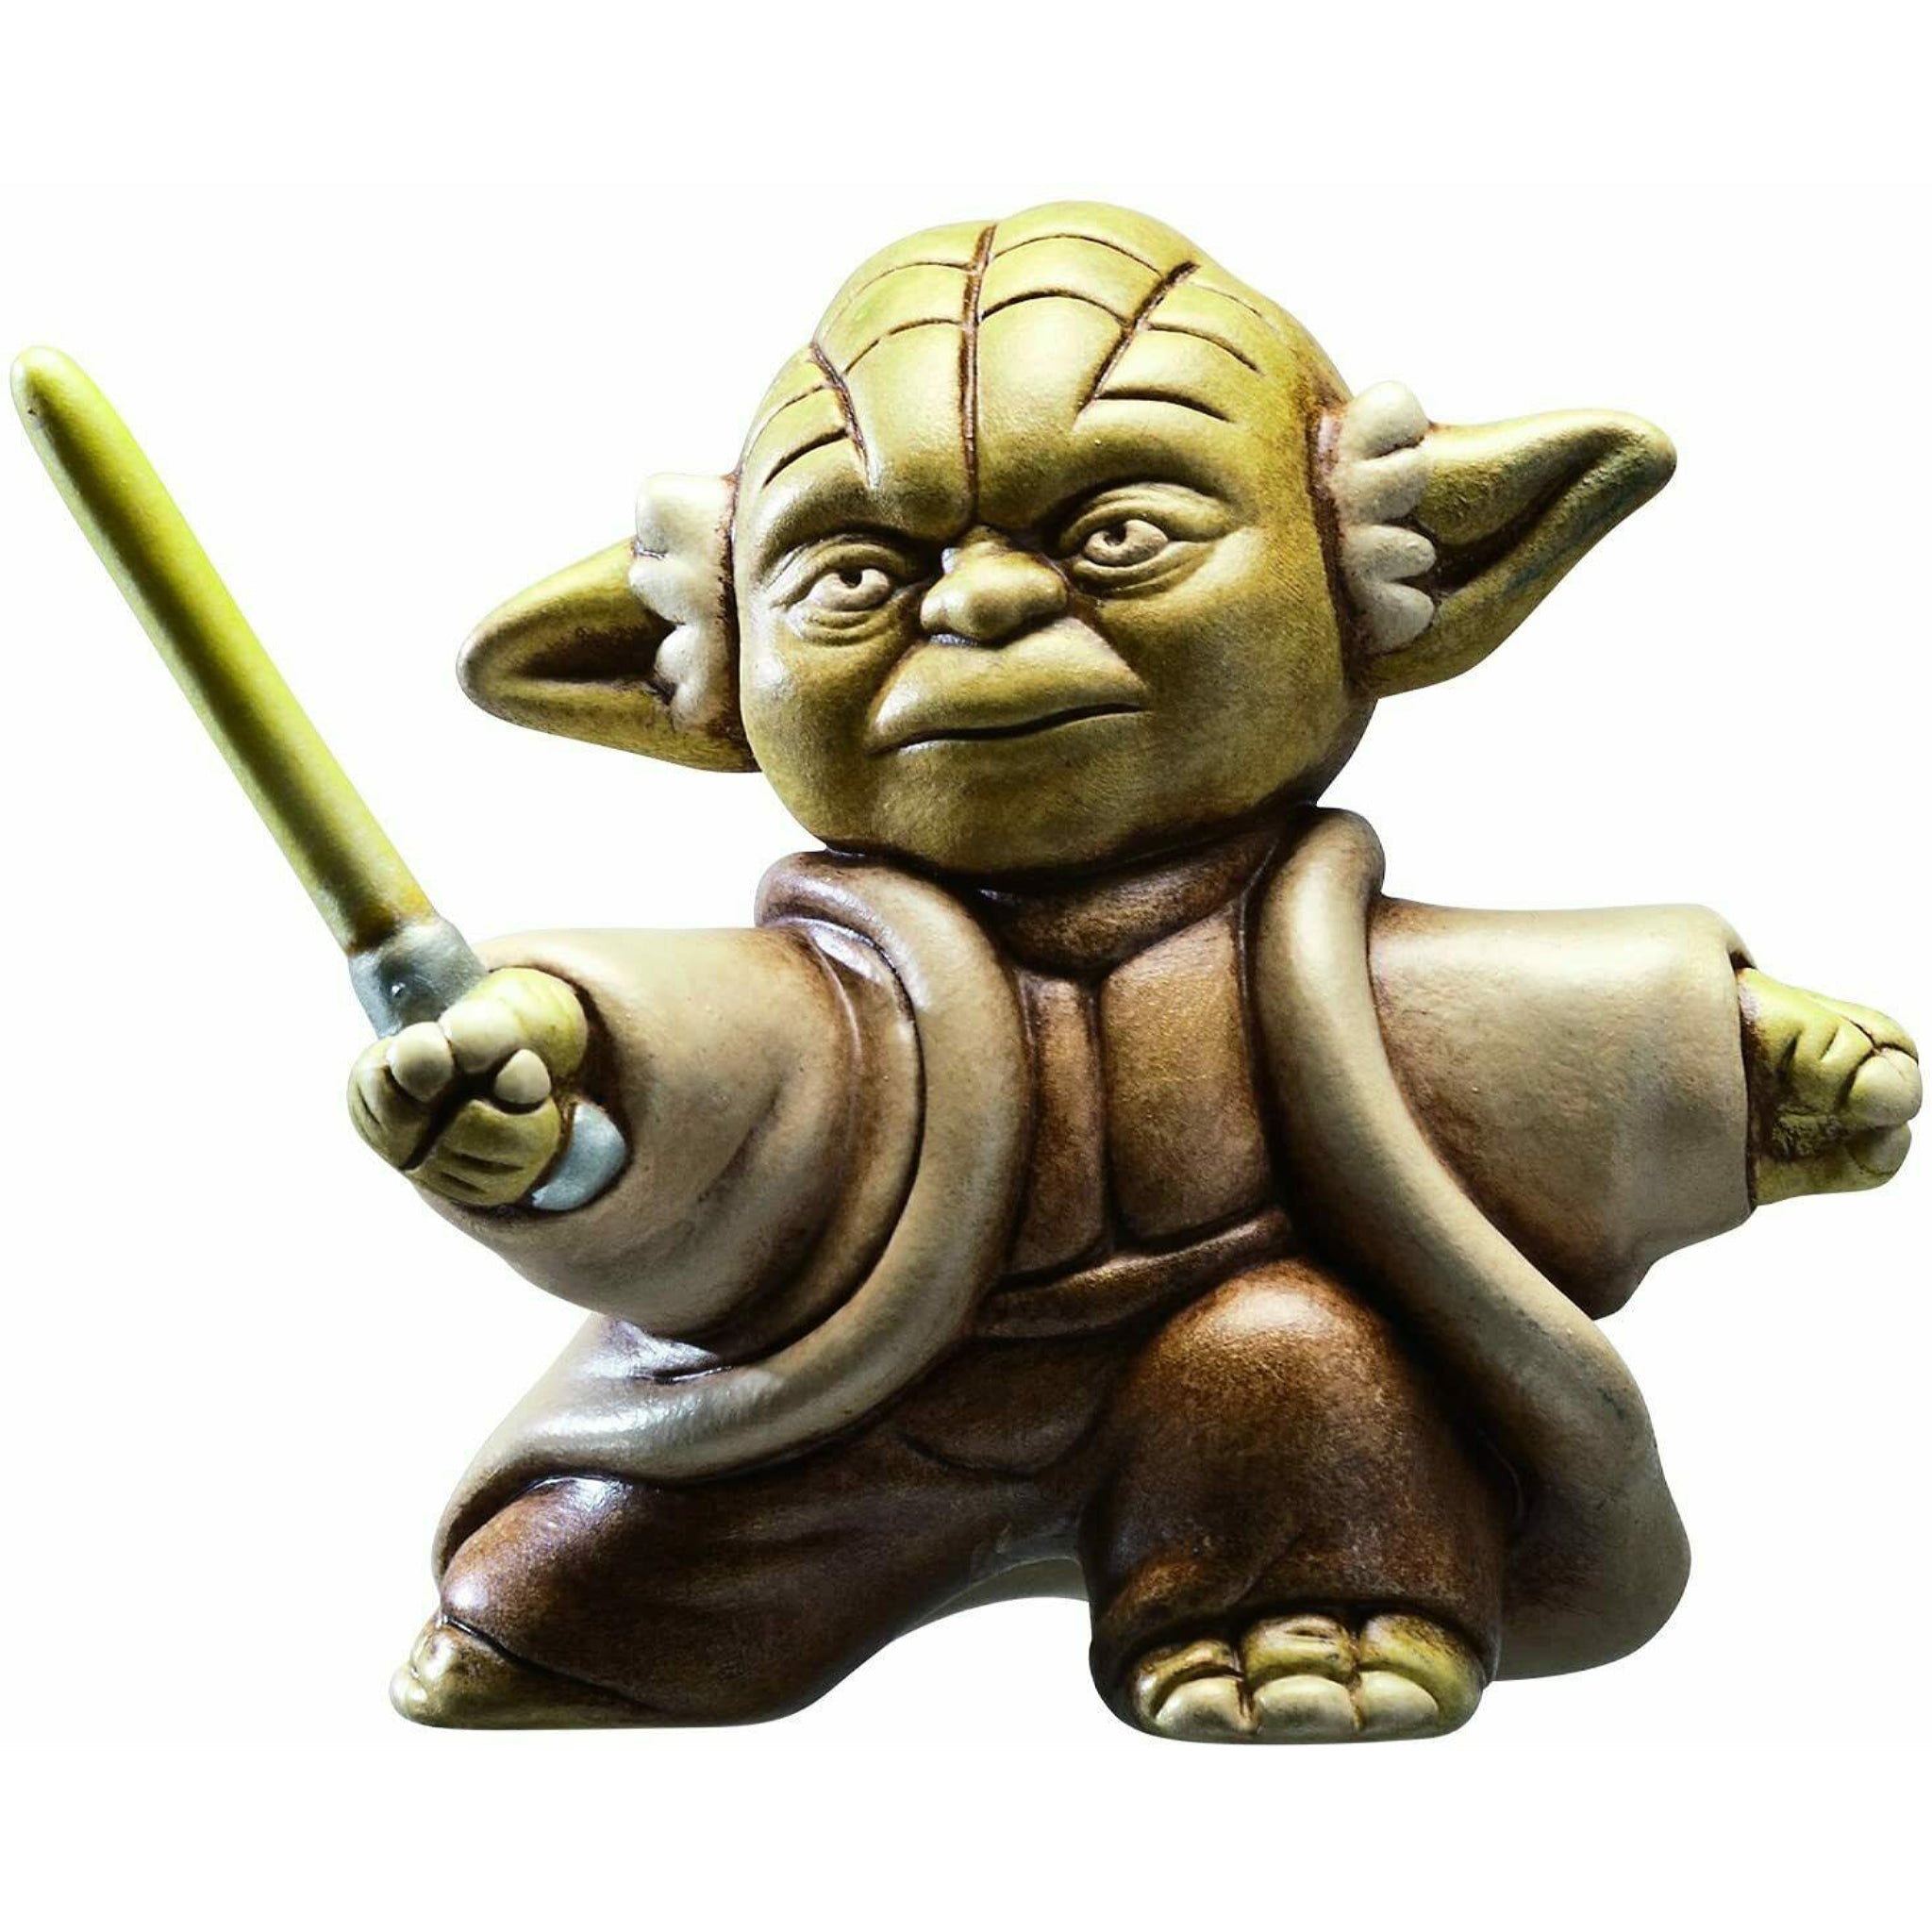 Joy Toy Star Wars Yoda May The Force Be with You High End Ceramic Figure EX DISPLAY